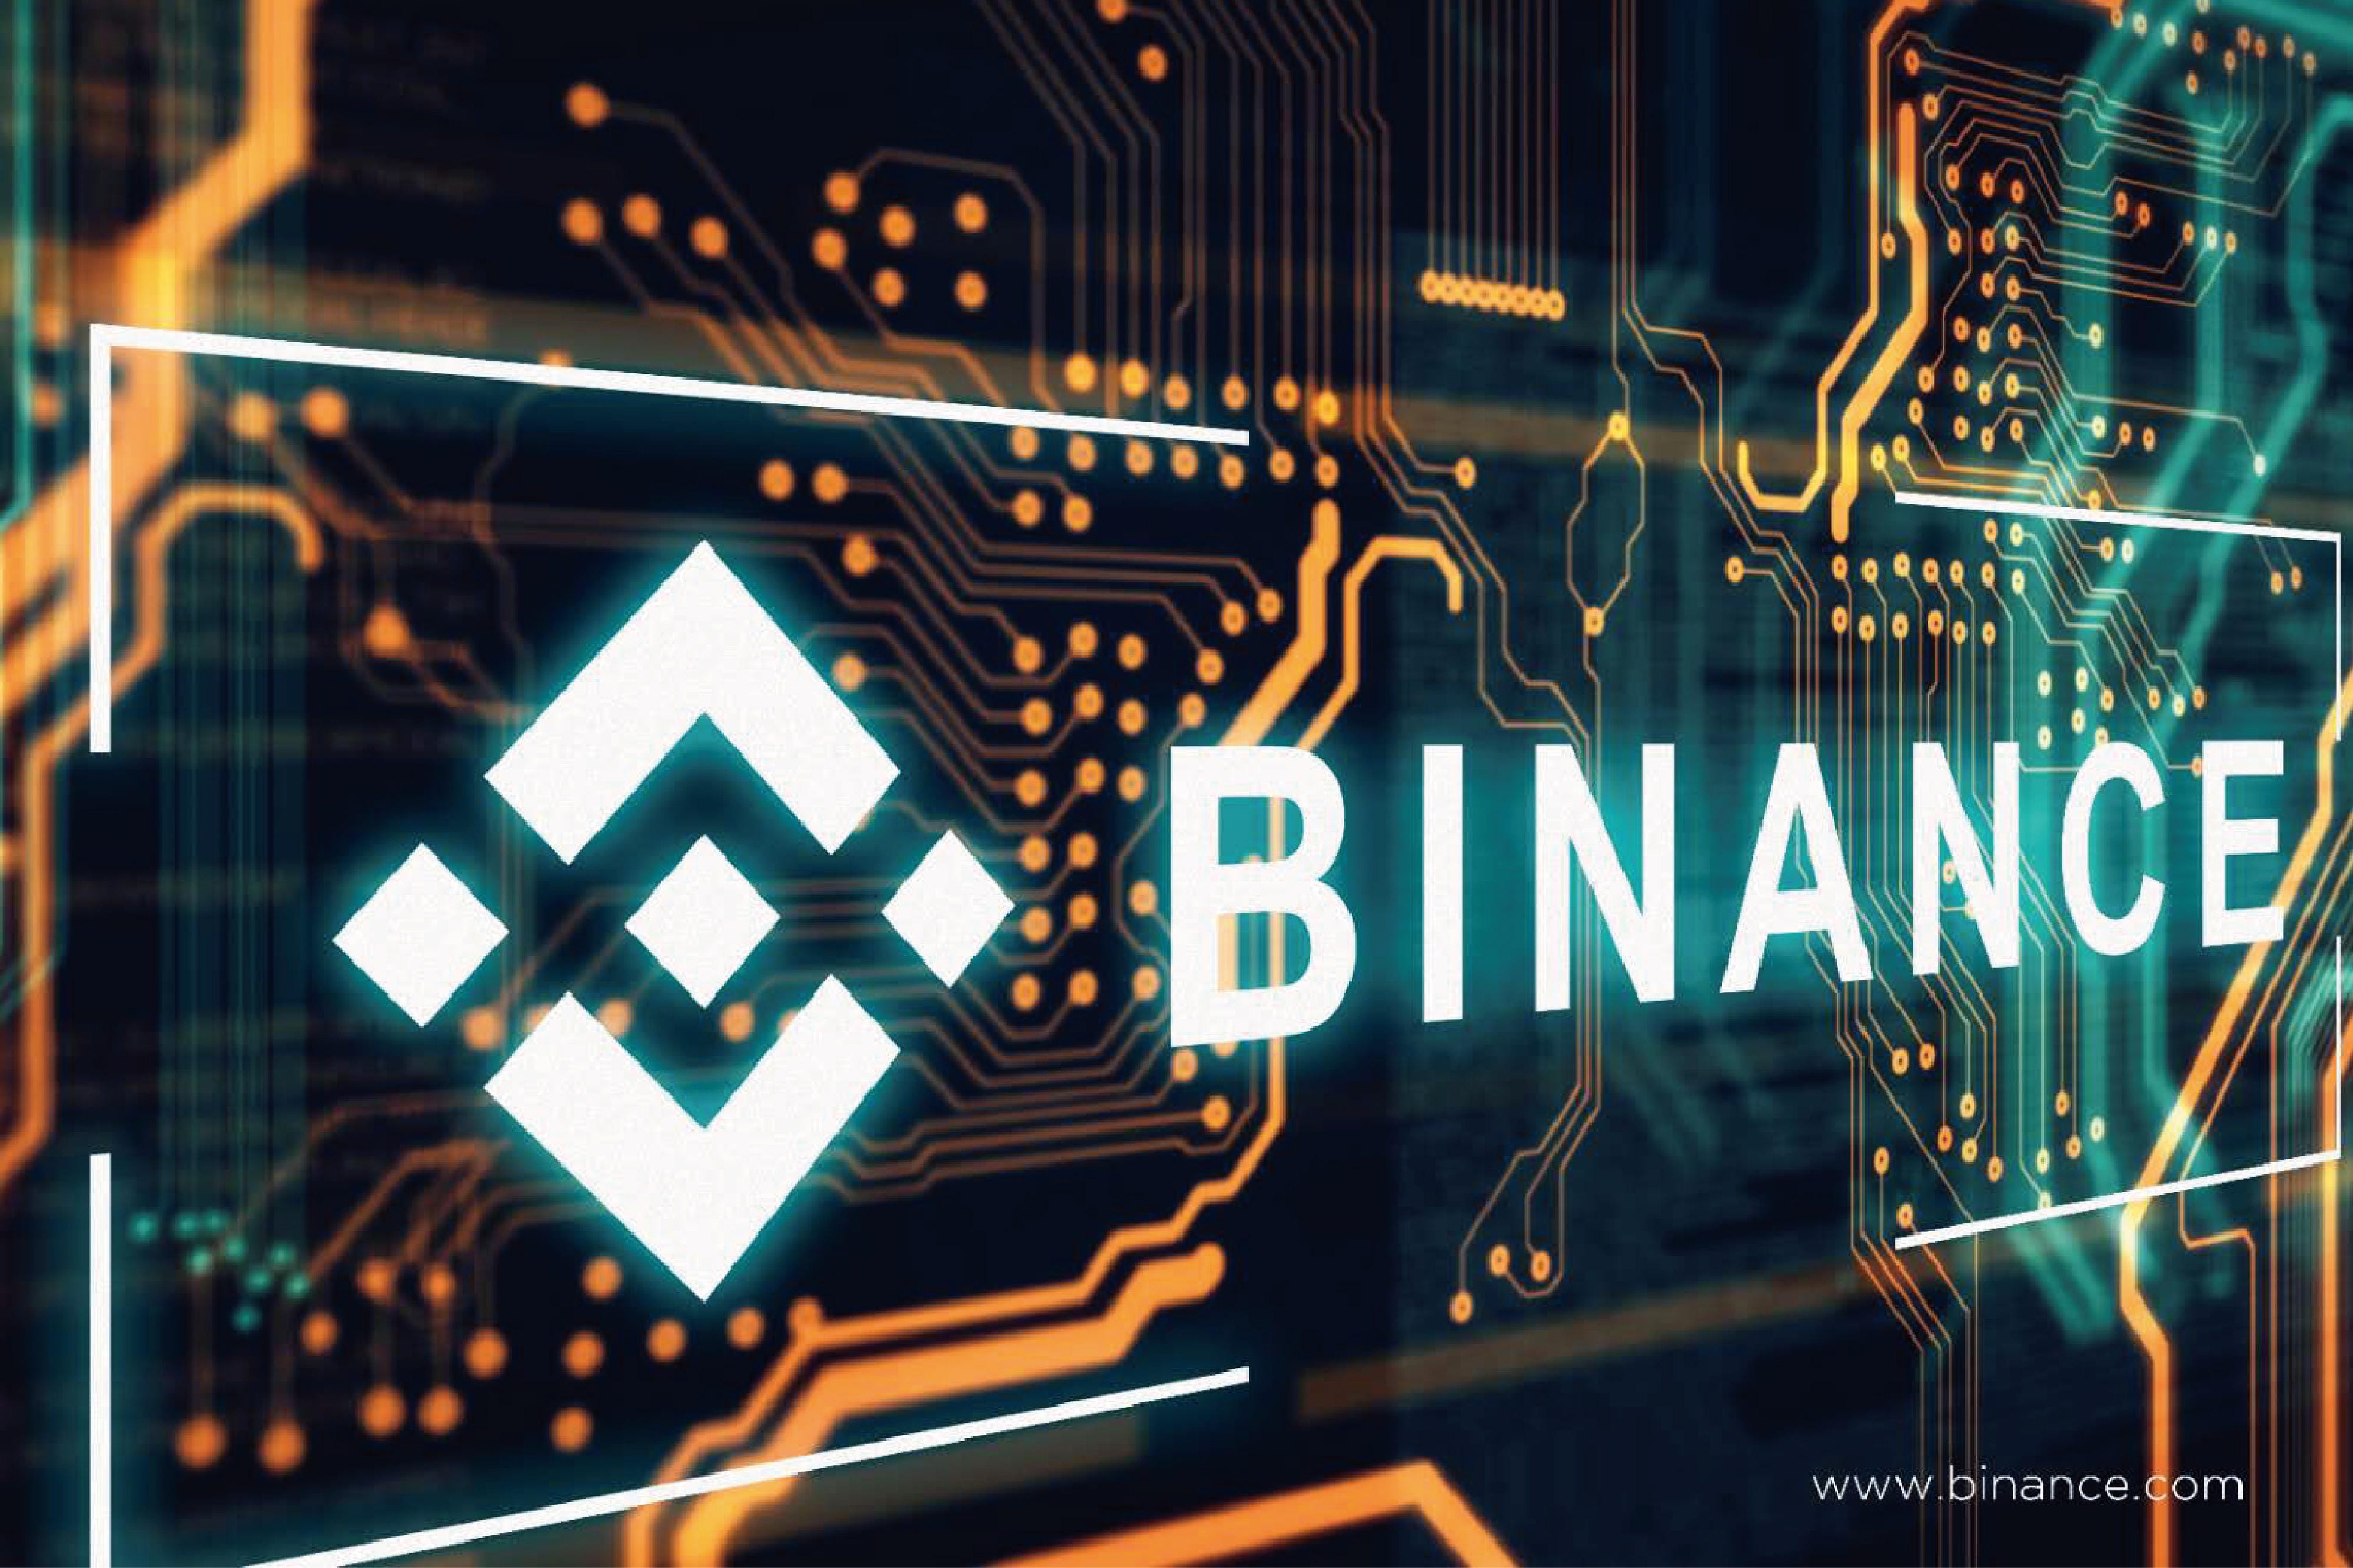 Binance offers $10 million in cryptocurrency to nab hackers - CNET